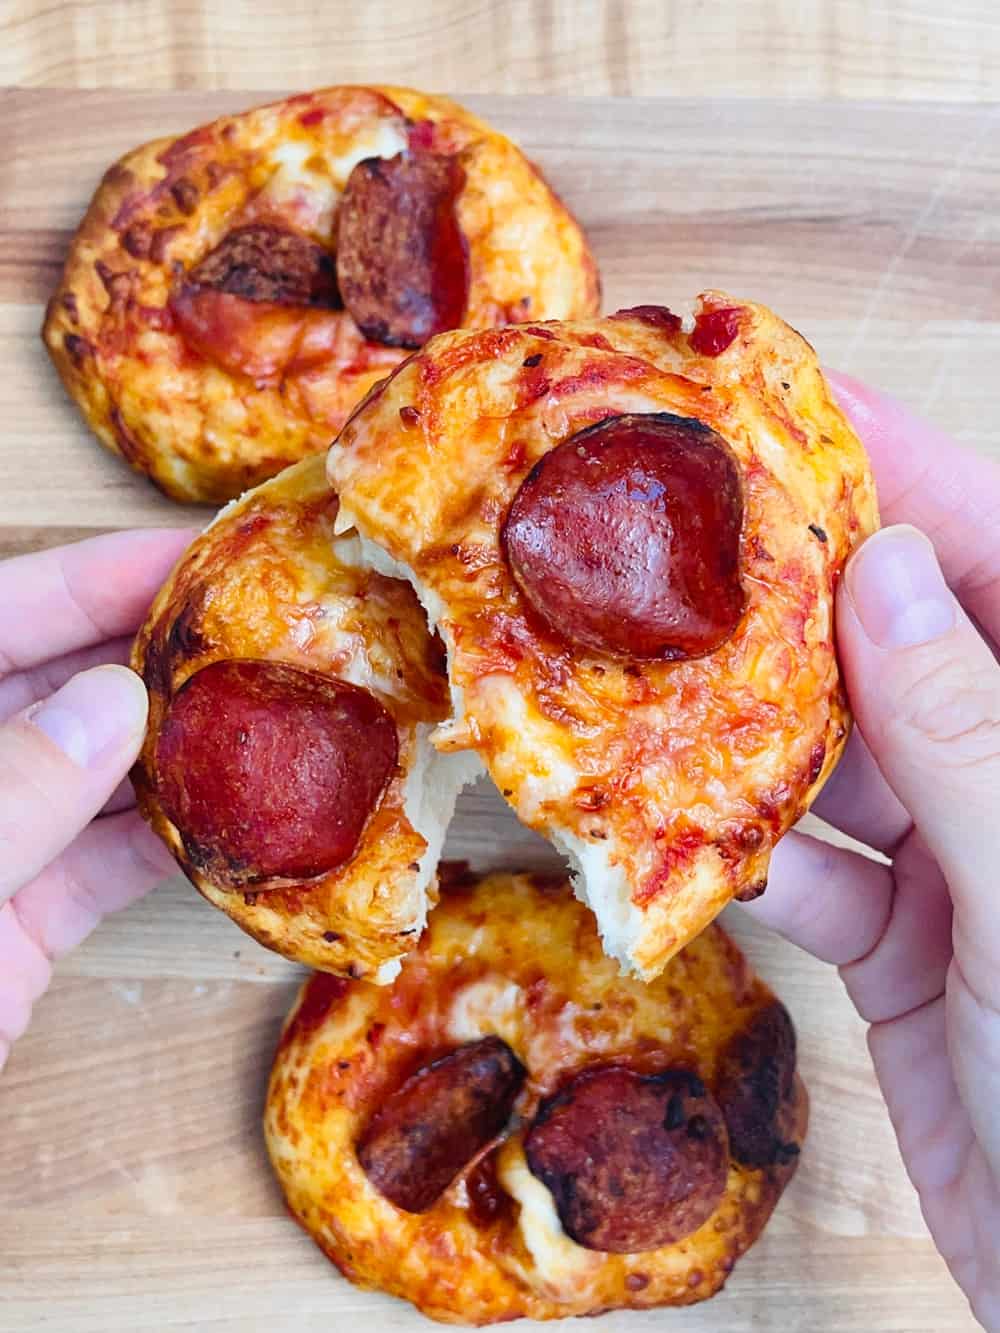 These Mini Air Fryer Biscuit Pizzas Are So Easy For A Quick Pizza Fix